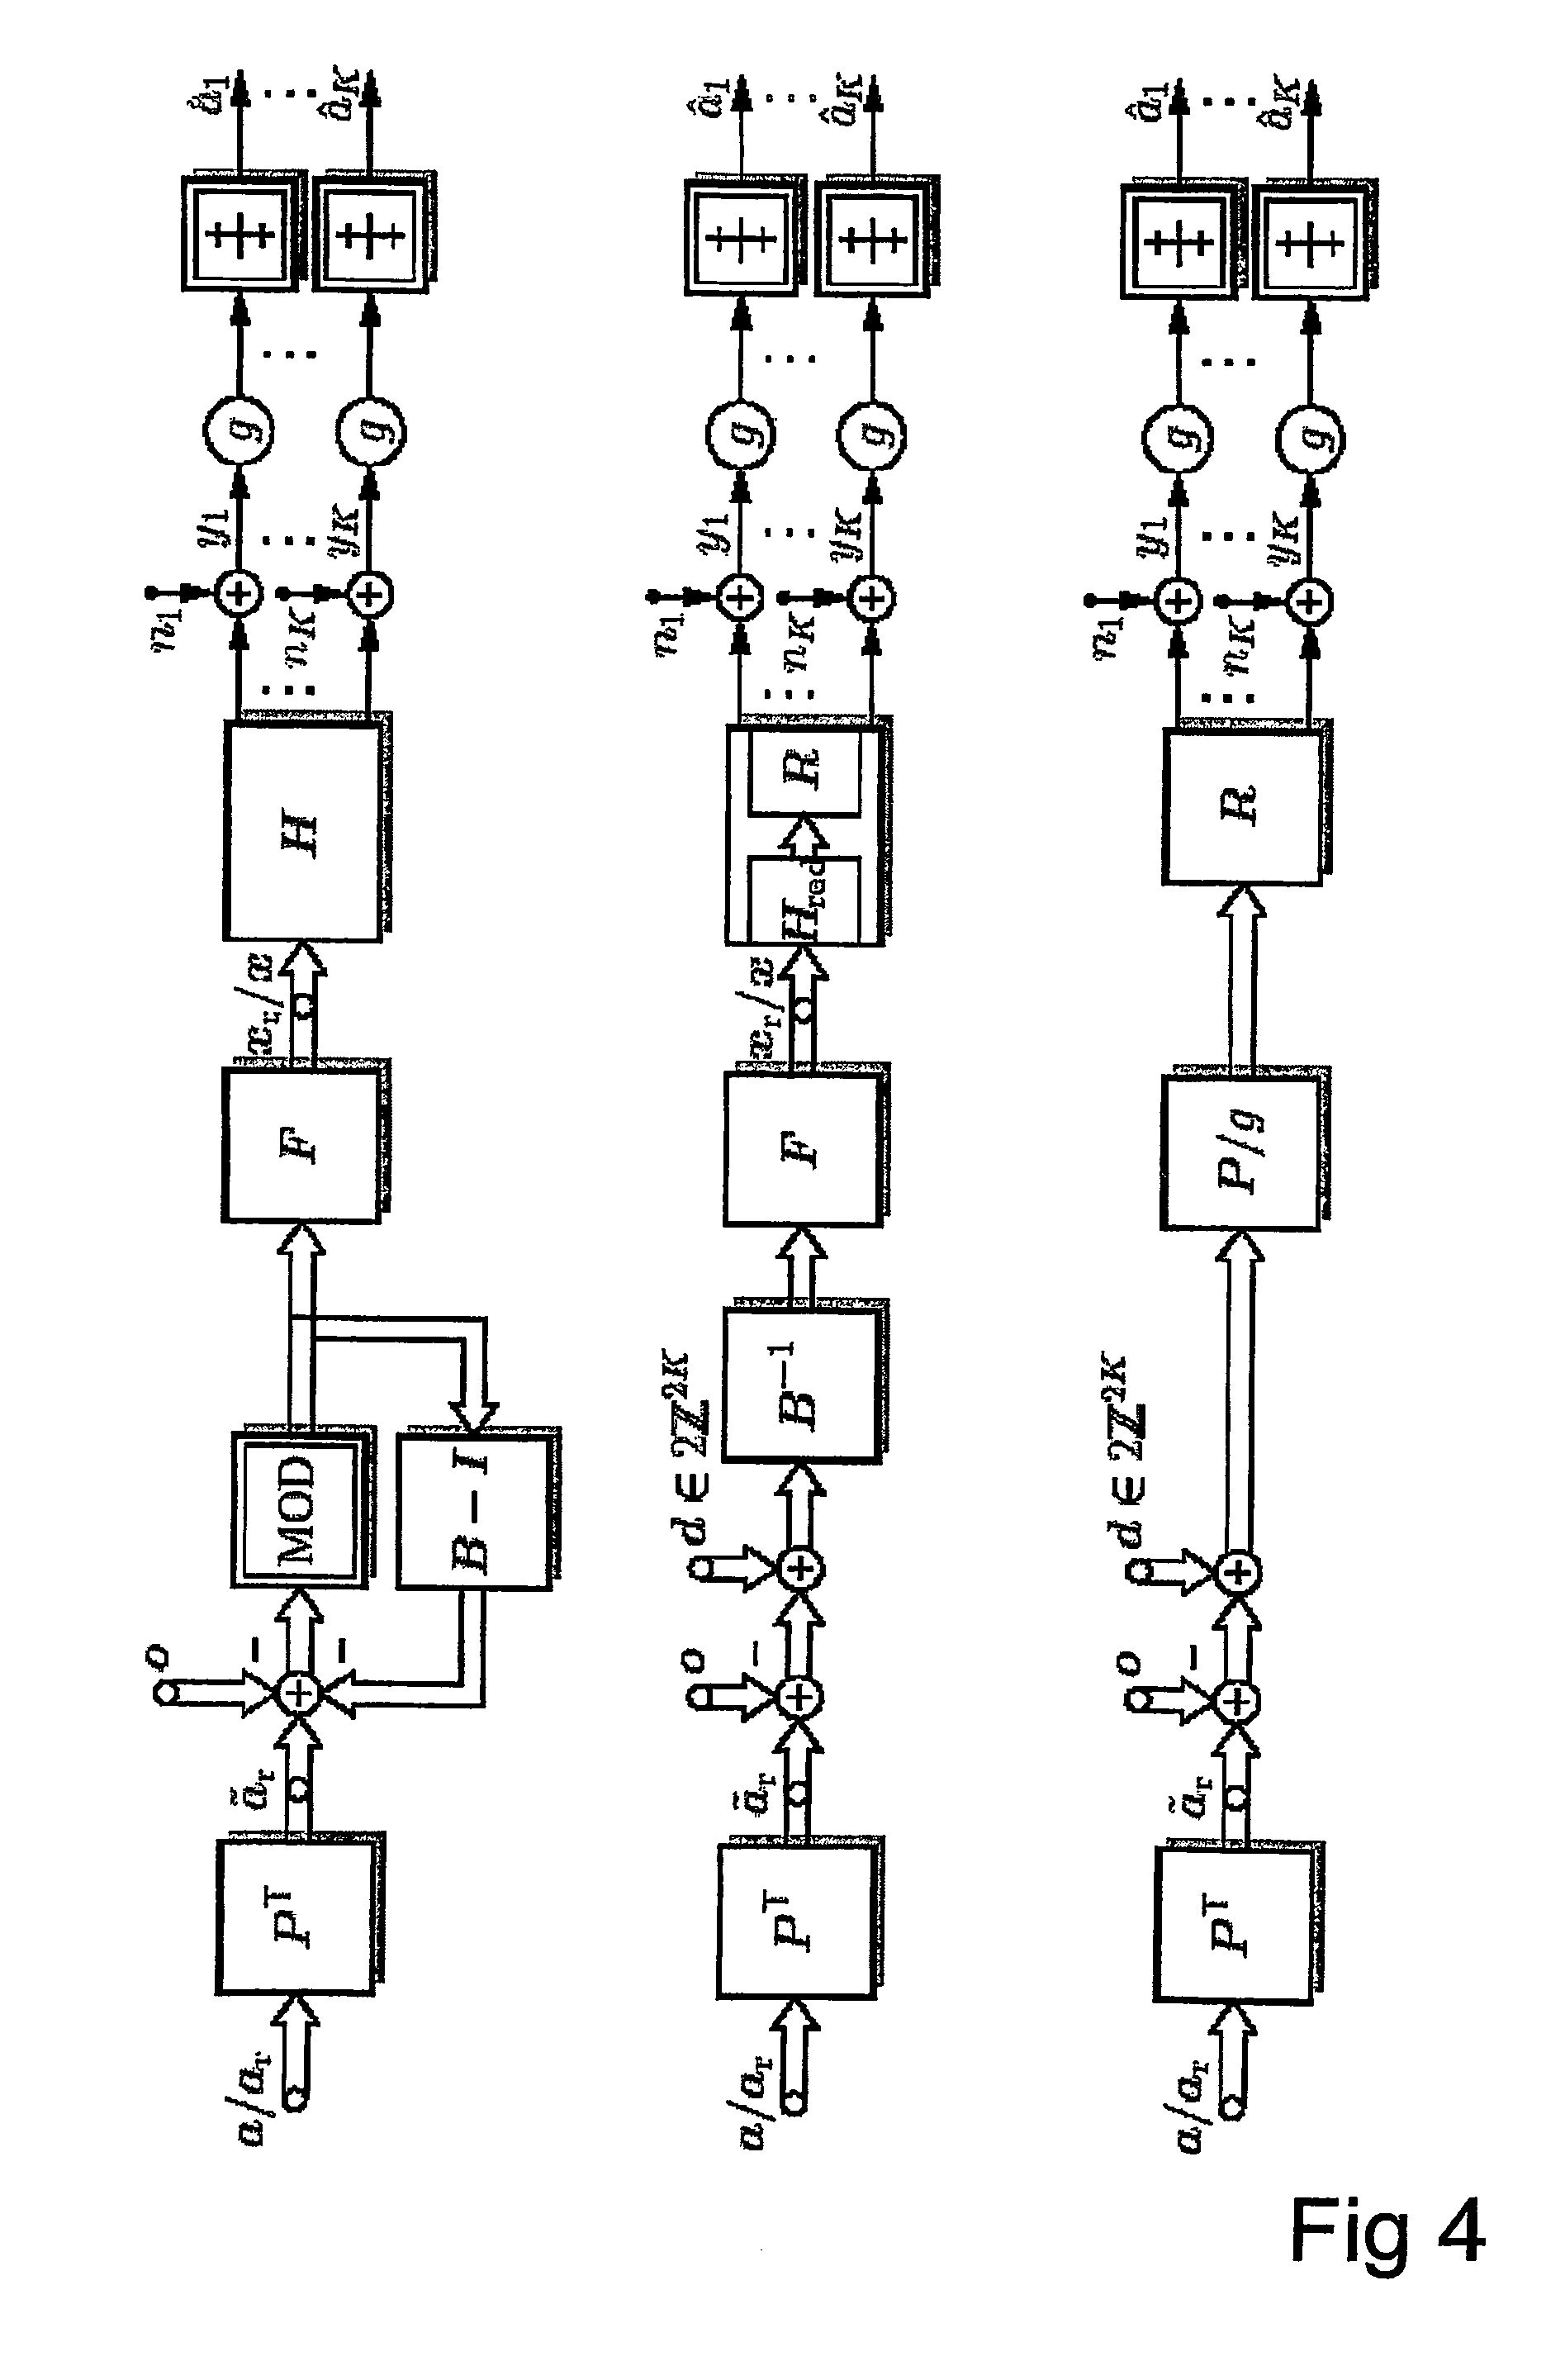 Nonlinear precoding method for a digital broadcast channel